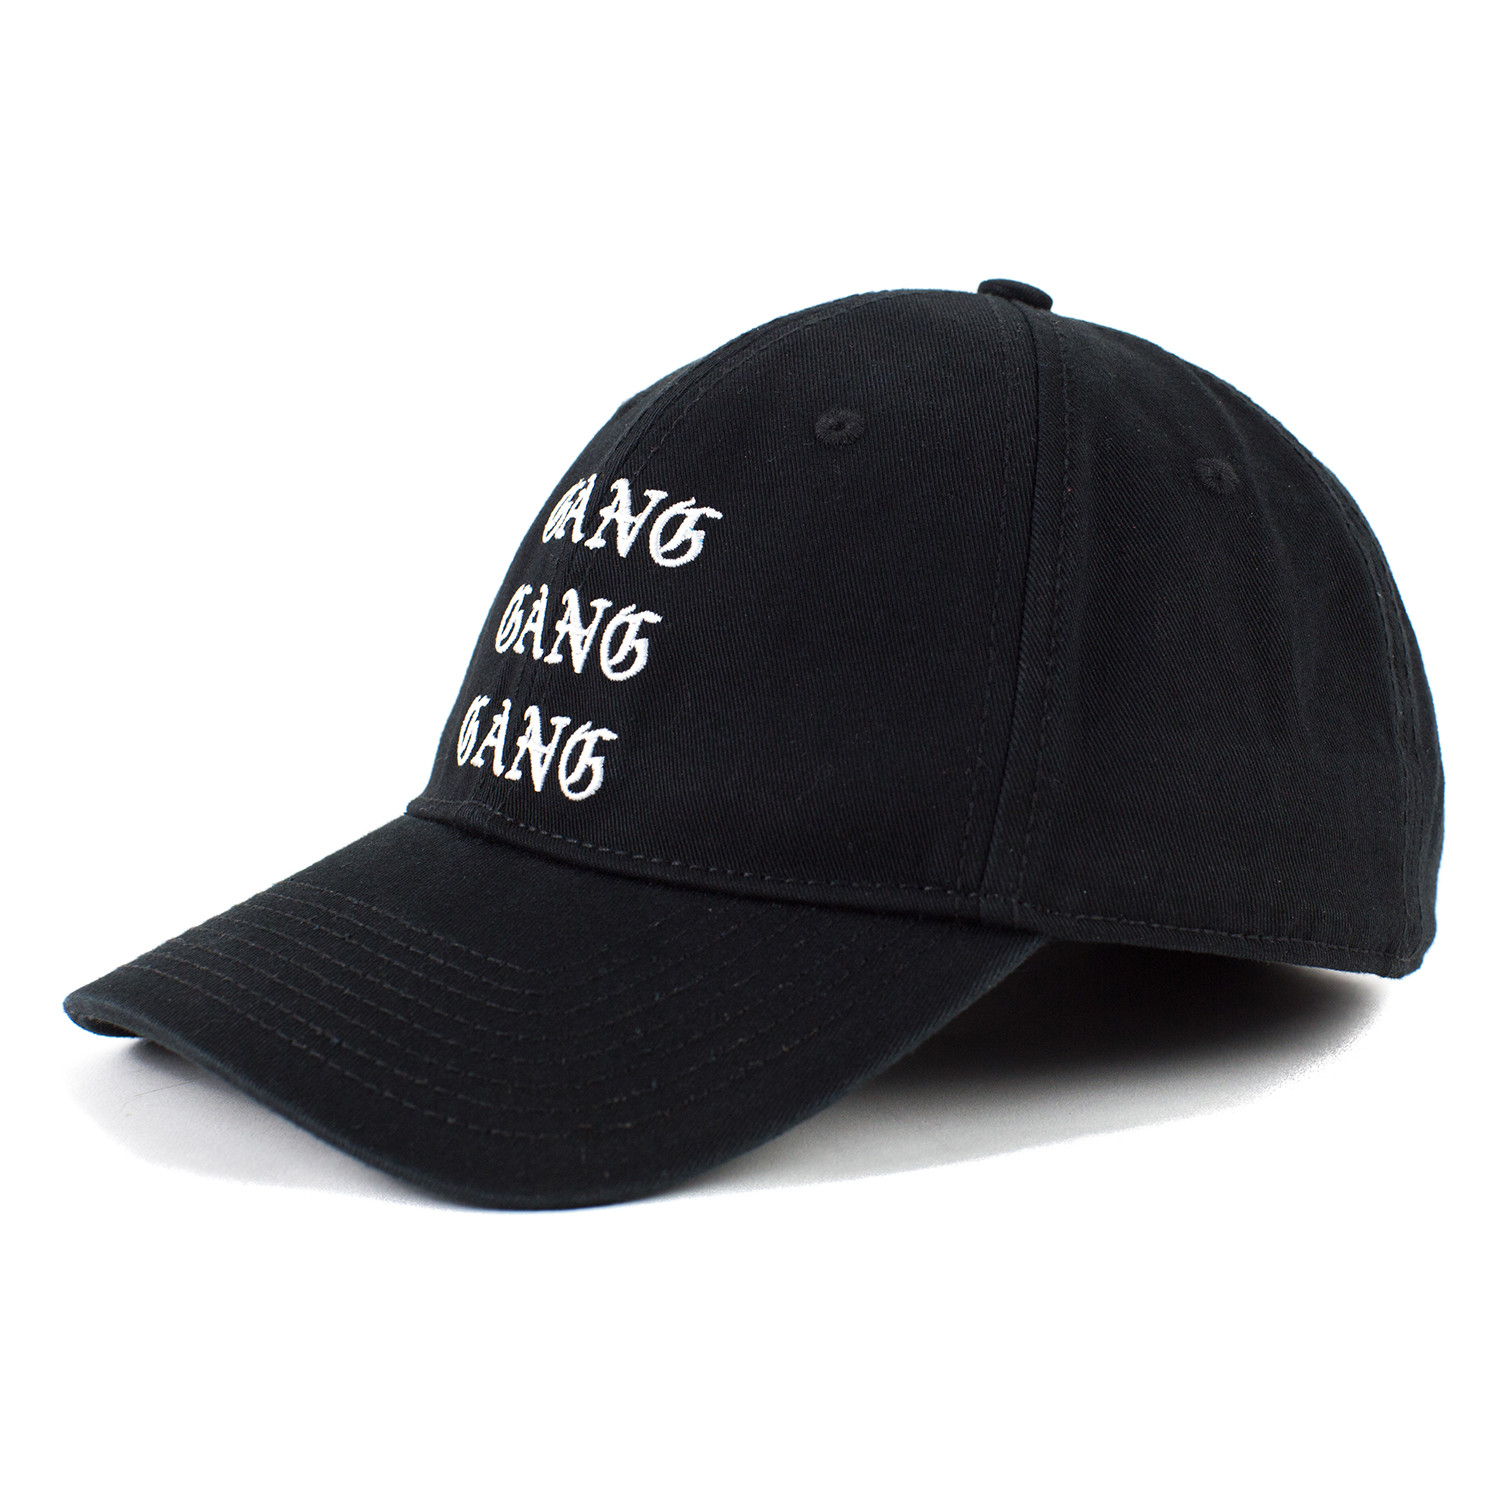 Gang Dad Hat // Black - No Bad Ideas - Touch of Modern